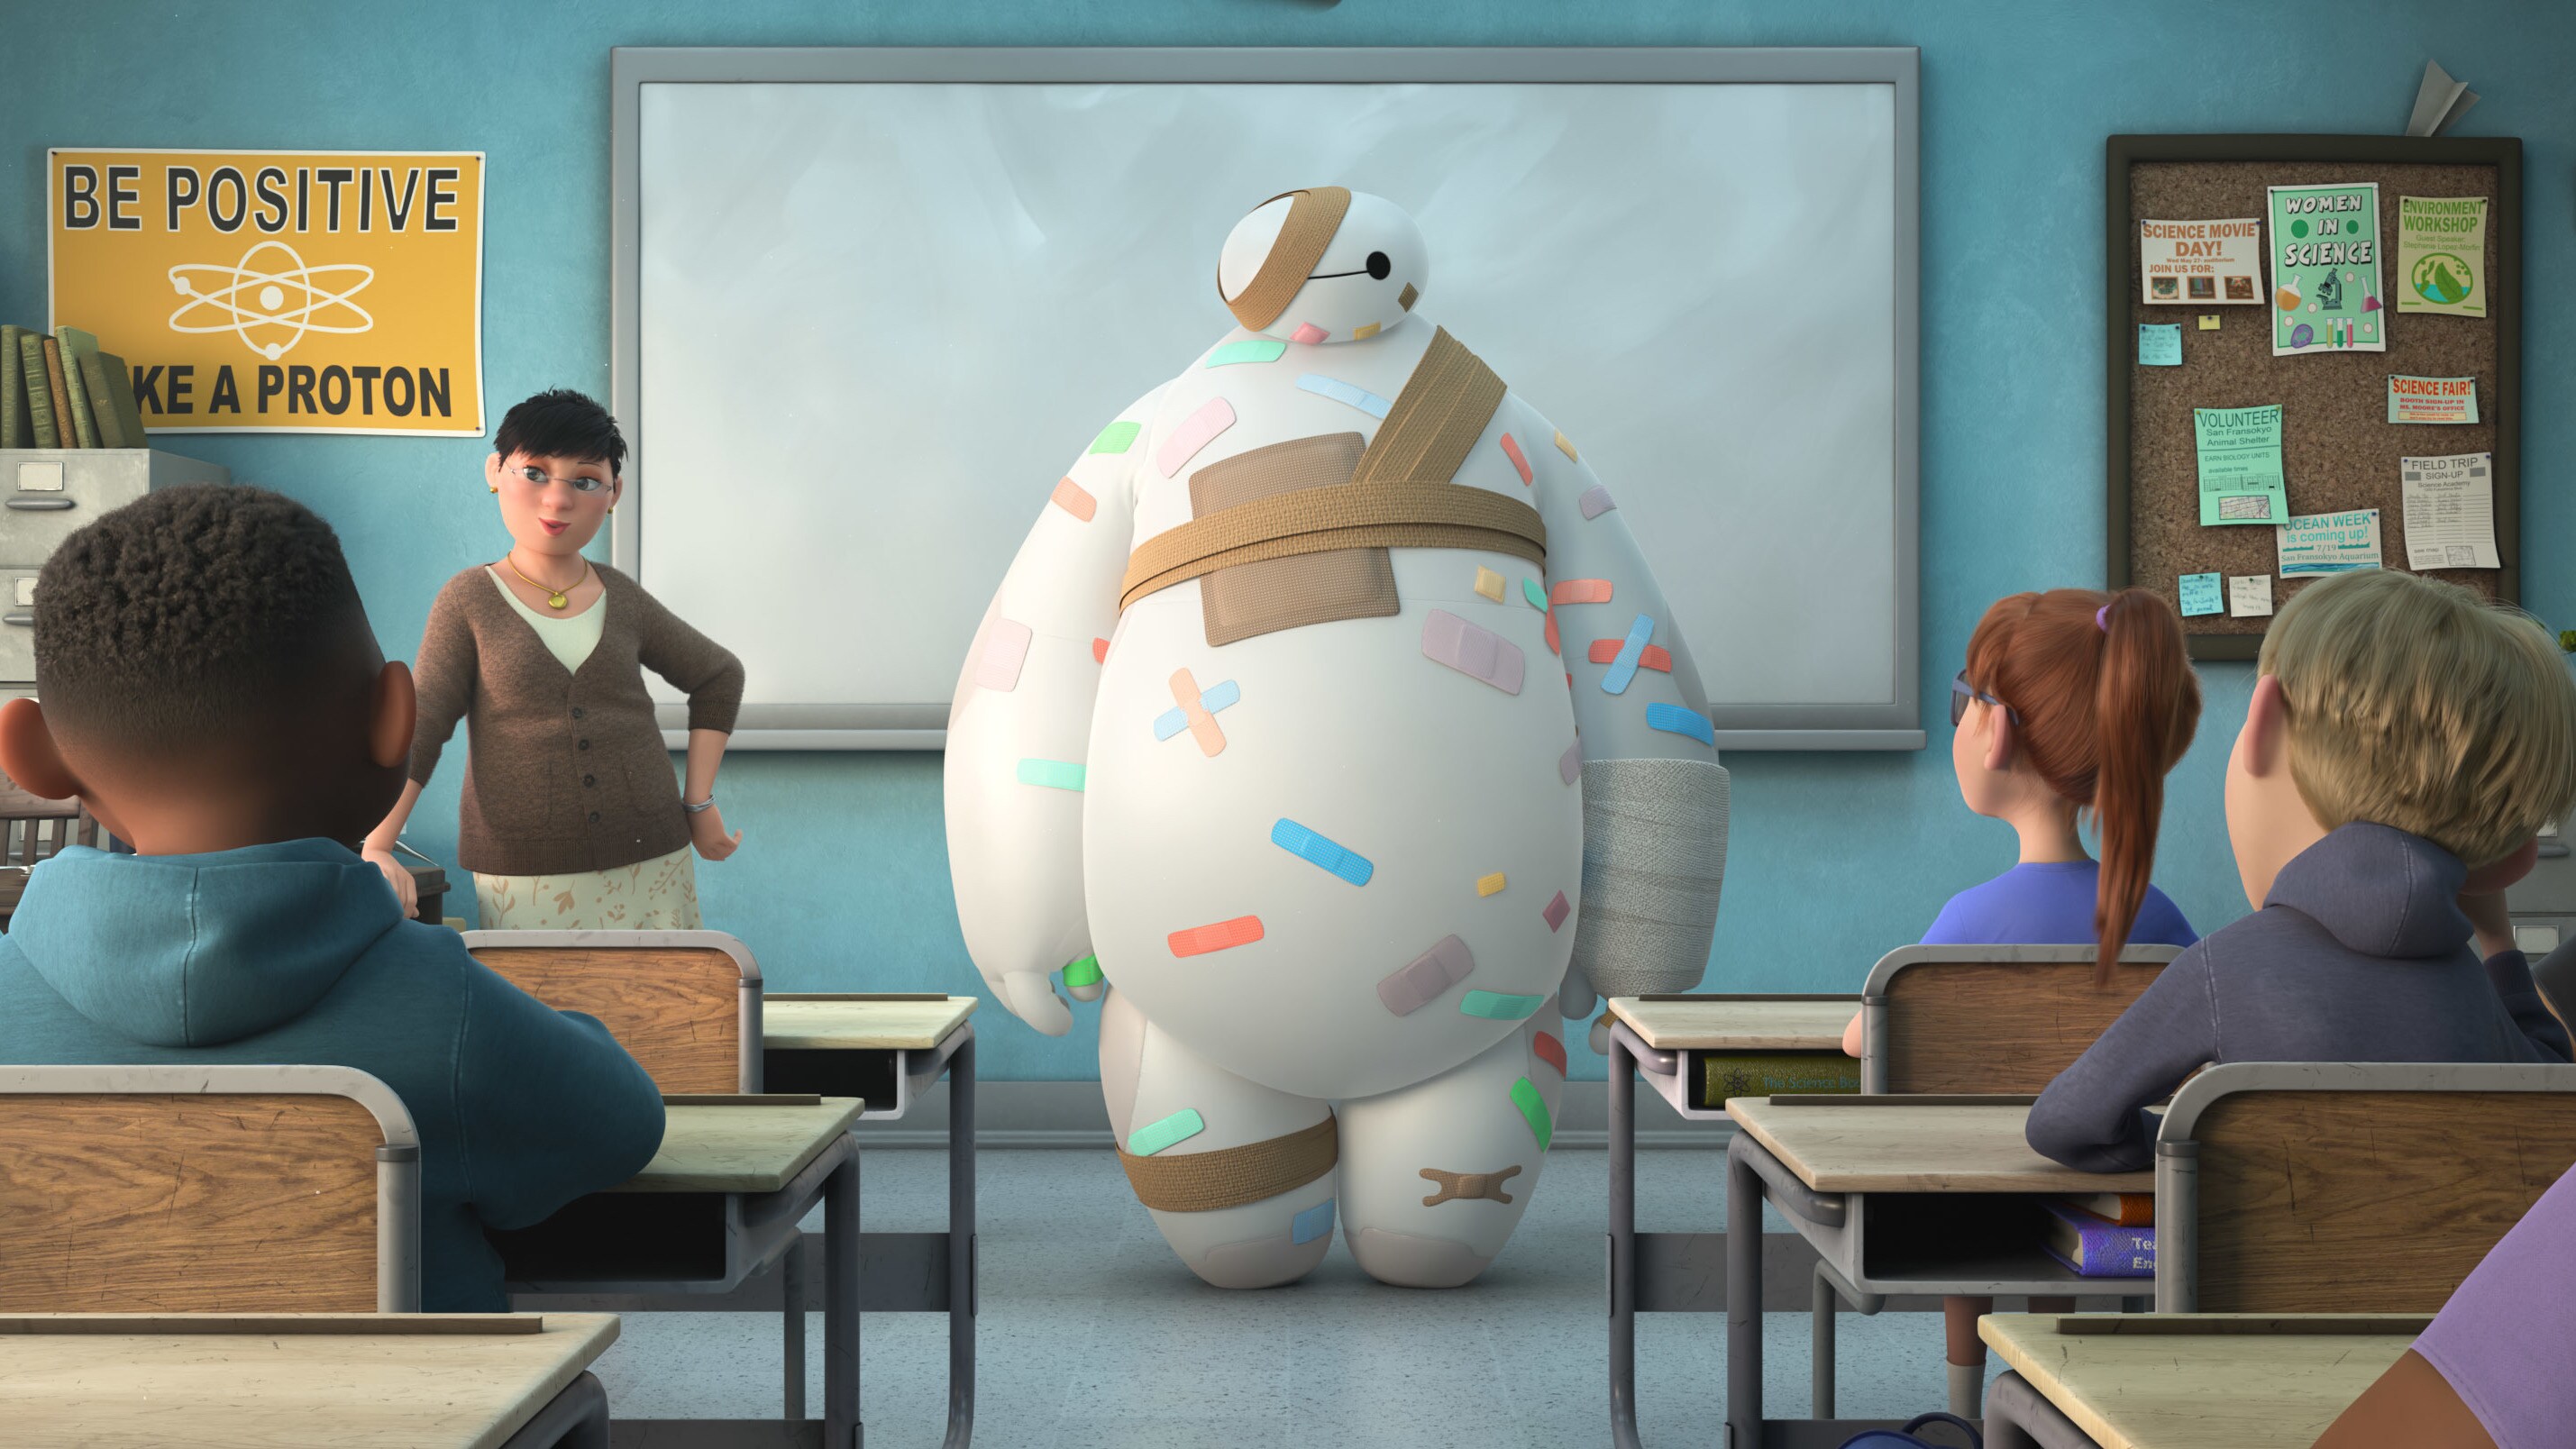 Walt Disney Animation Studios’ “Baymax!” returns to the fantastical city of San Fransokyo where the affable, inflatable, inimitable healthcare companion robot, Baymax (voice of Scott Adsit), sets out to do what he was programmed to do: help others. The series of healthcare capers introduces extraordinary characters who need Baymax’s signature approach to healing in more ways than they realize. Created by Don Hall, who helmed 2014’s Oscar®-winning film “Big Hero 6,” “Baymax!” streams exclusively on Disney+ starting June 29, 2022. © 2022 Disney. All Rights Reserved.